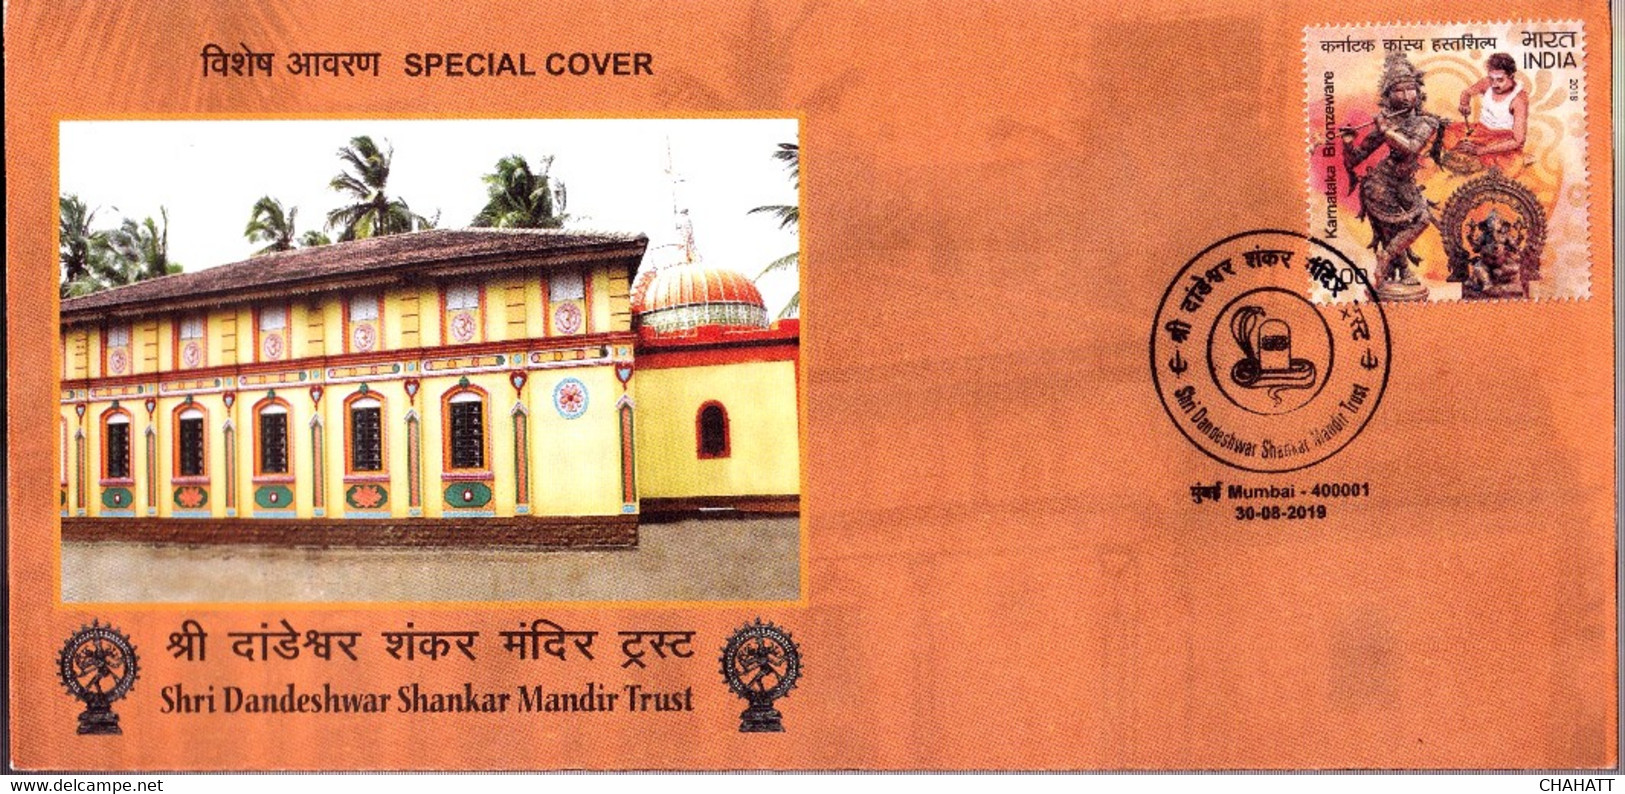 HINDUISM- LORD SHIVA- DANDESHWAR SHANKAR TEMPLE - SPECIAL COVER WITH PICTORIAL CANCELLATION- INDIA-2019-BX3-30 - Hindouisme